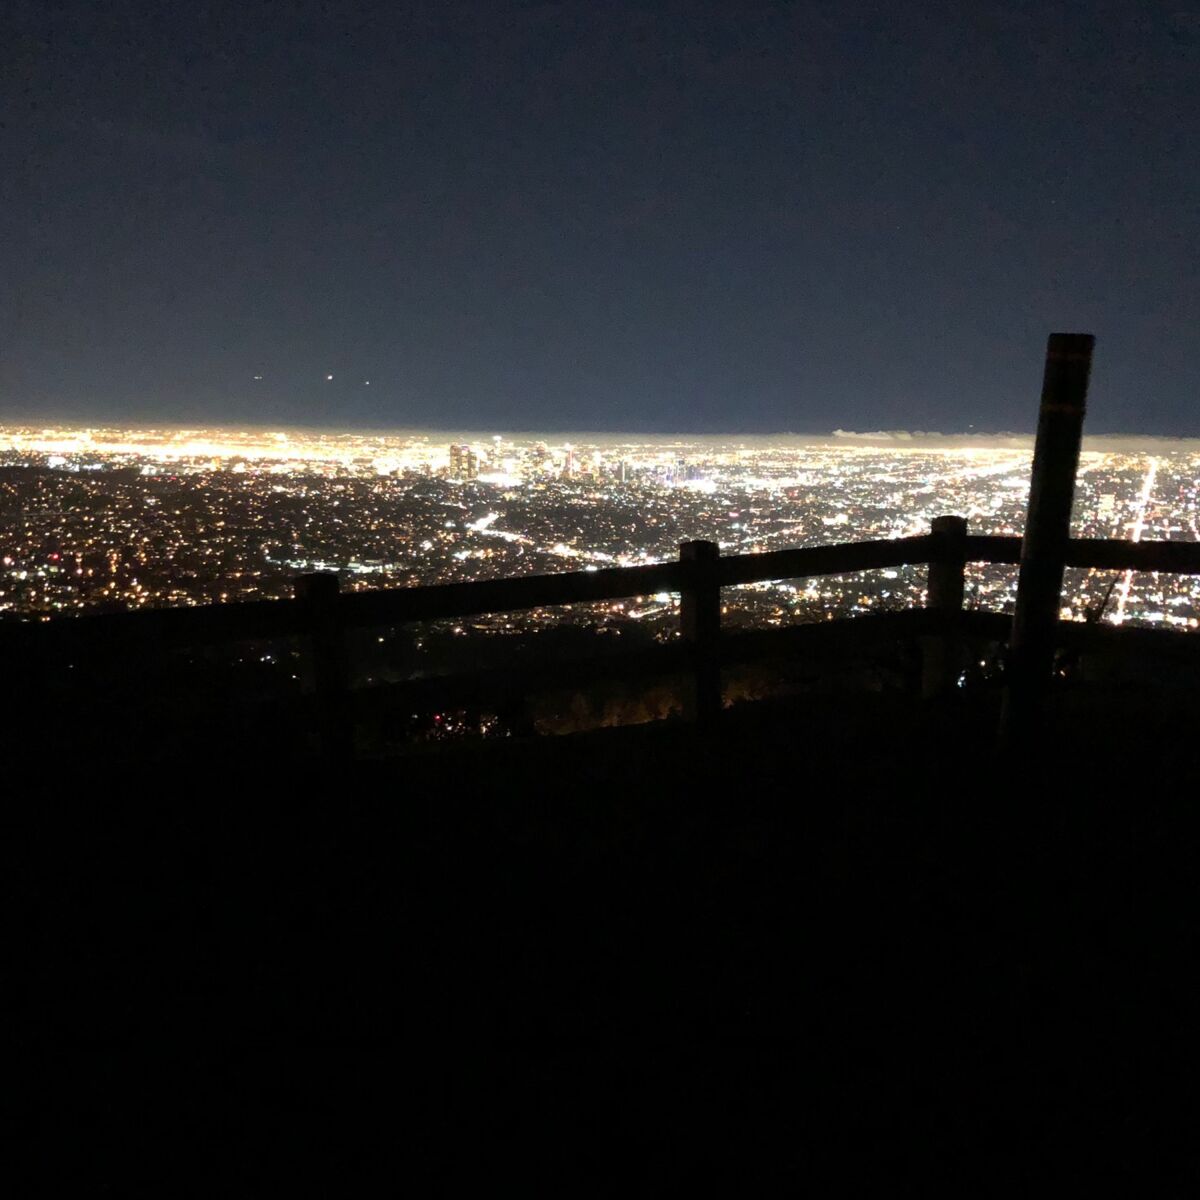 The bright-city night view of Los Angeles from the top of Mt. Hollywood.